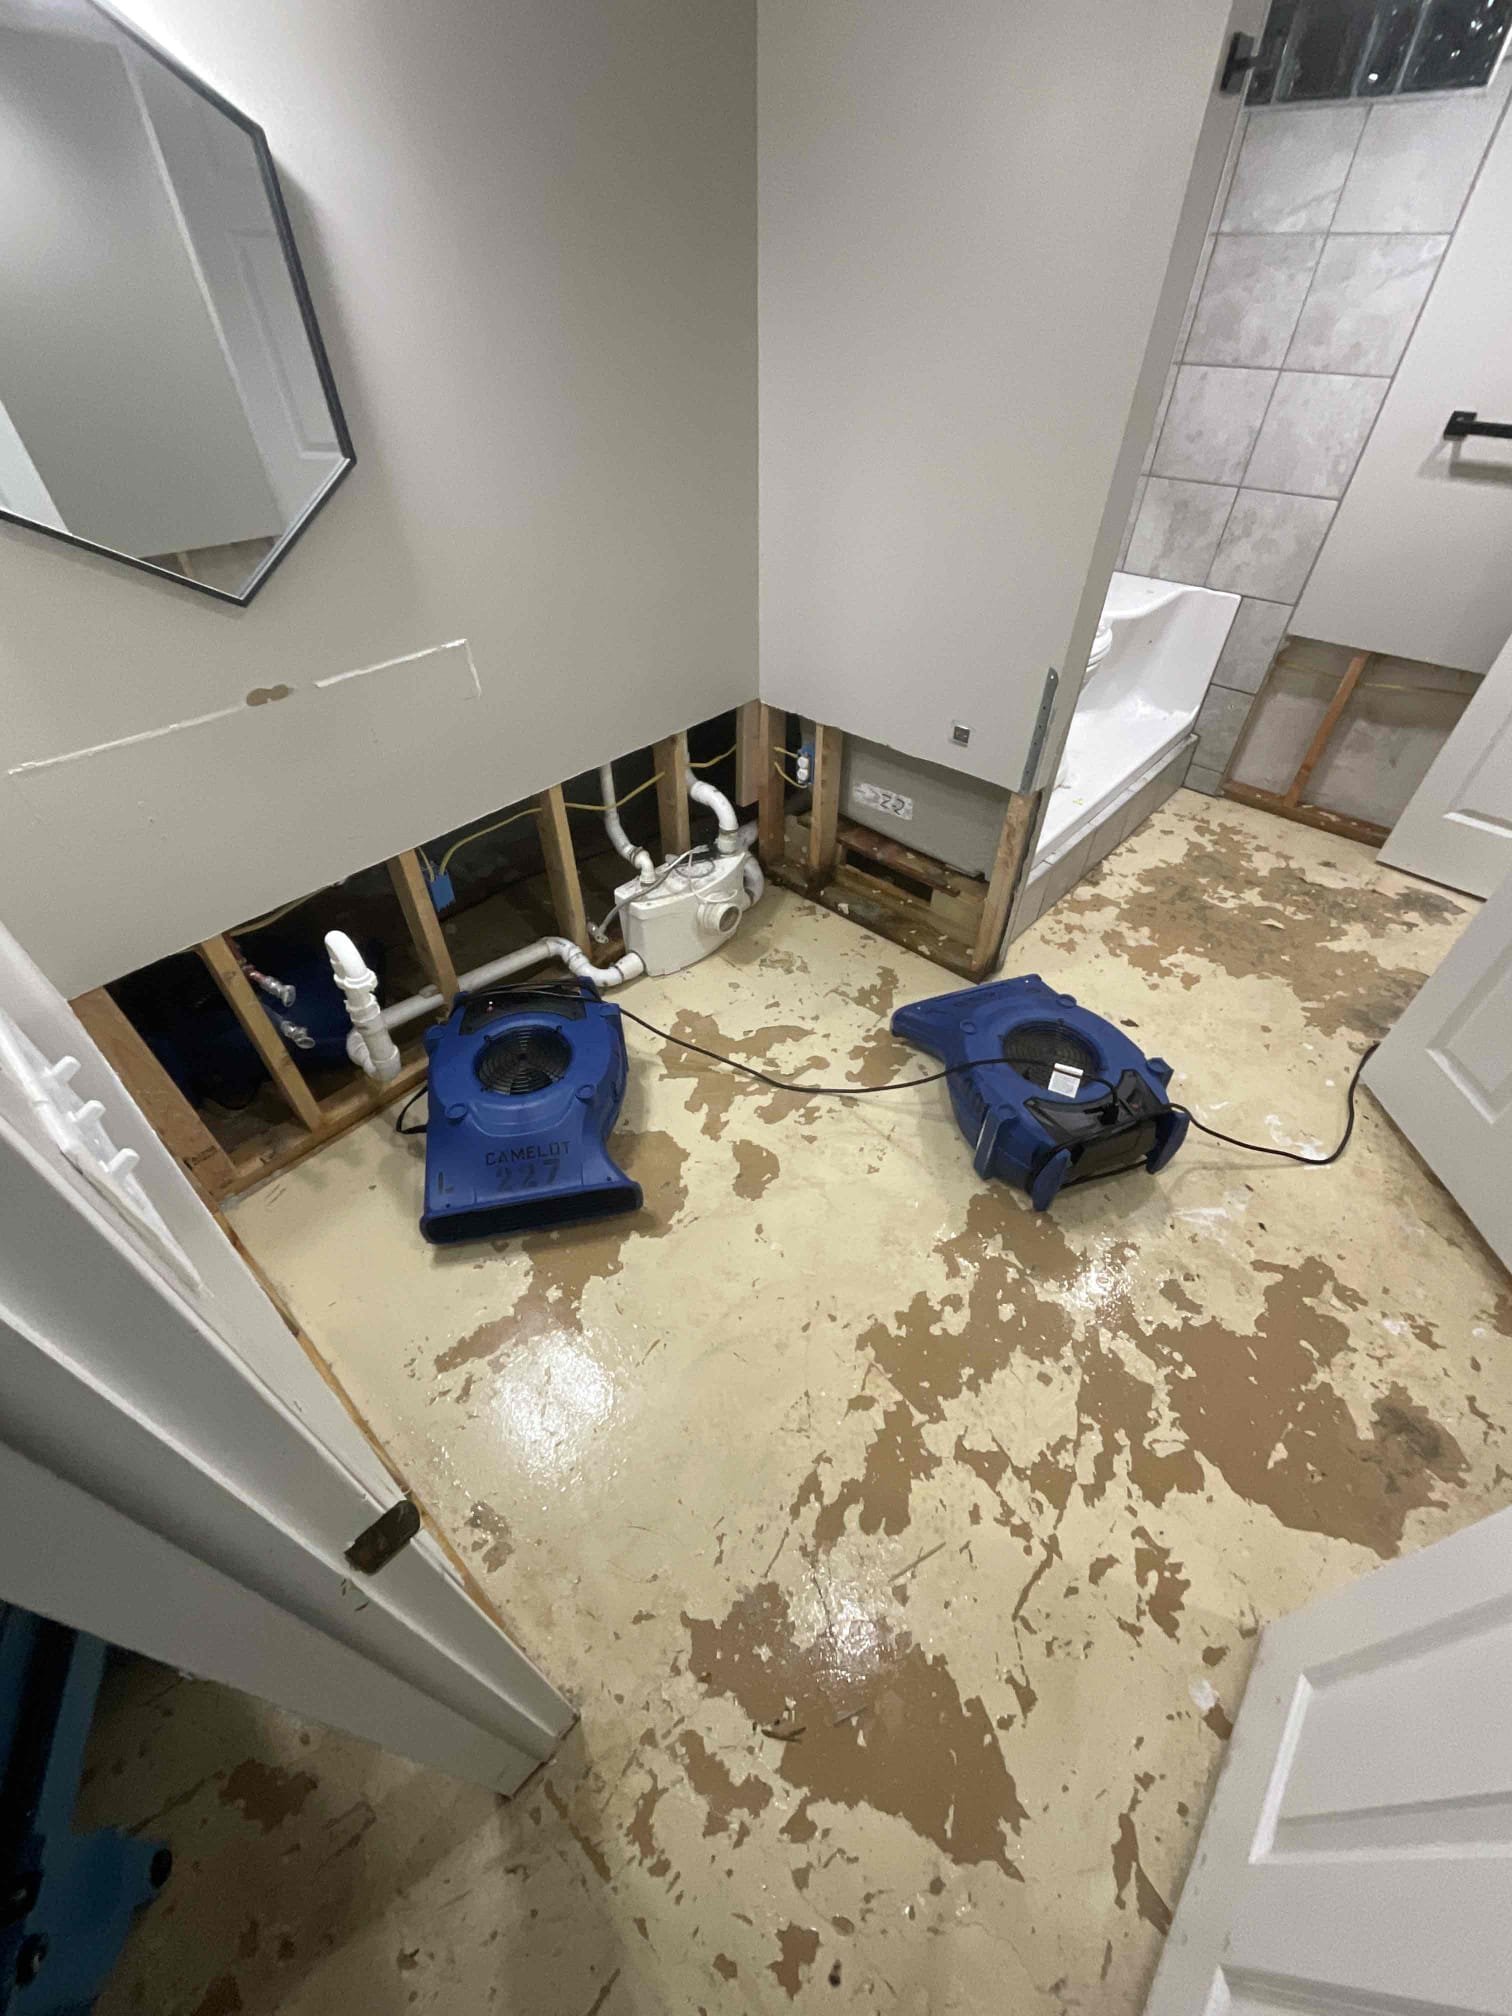 Bathroom dry out after sewage backup